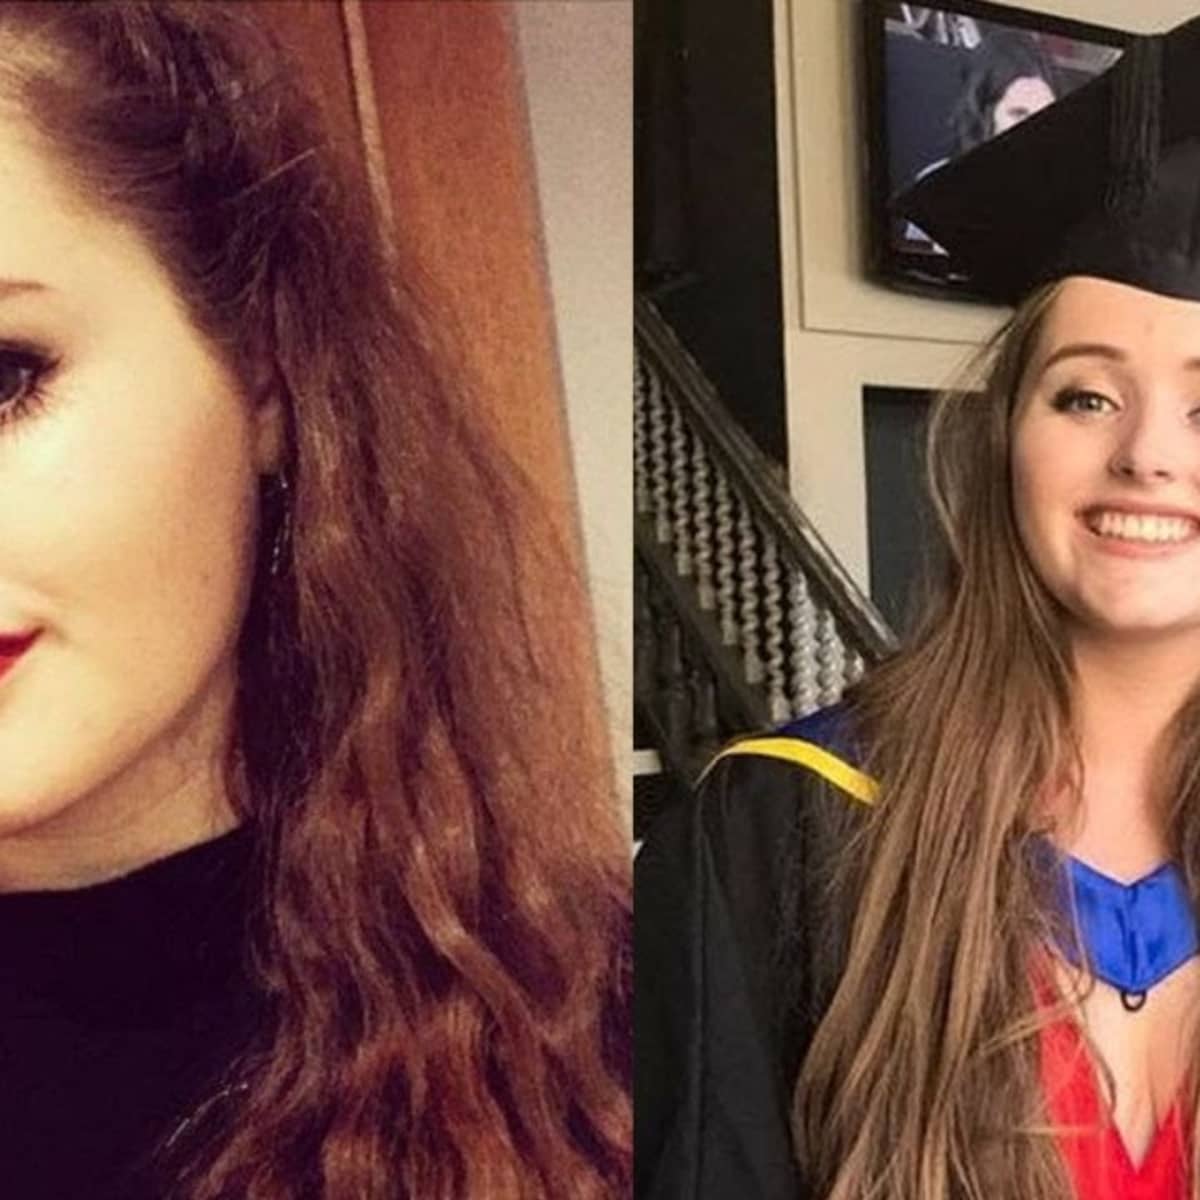 Grace Millane British Backpacker Murdered by Tinder Date